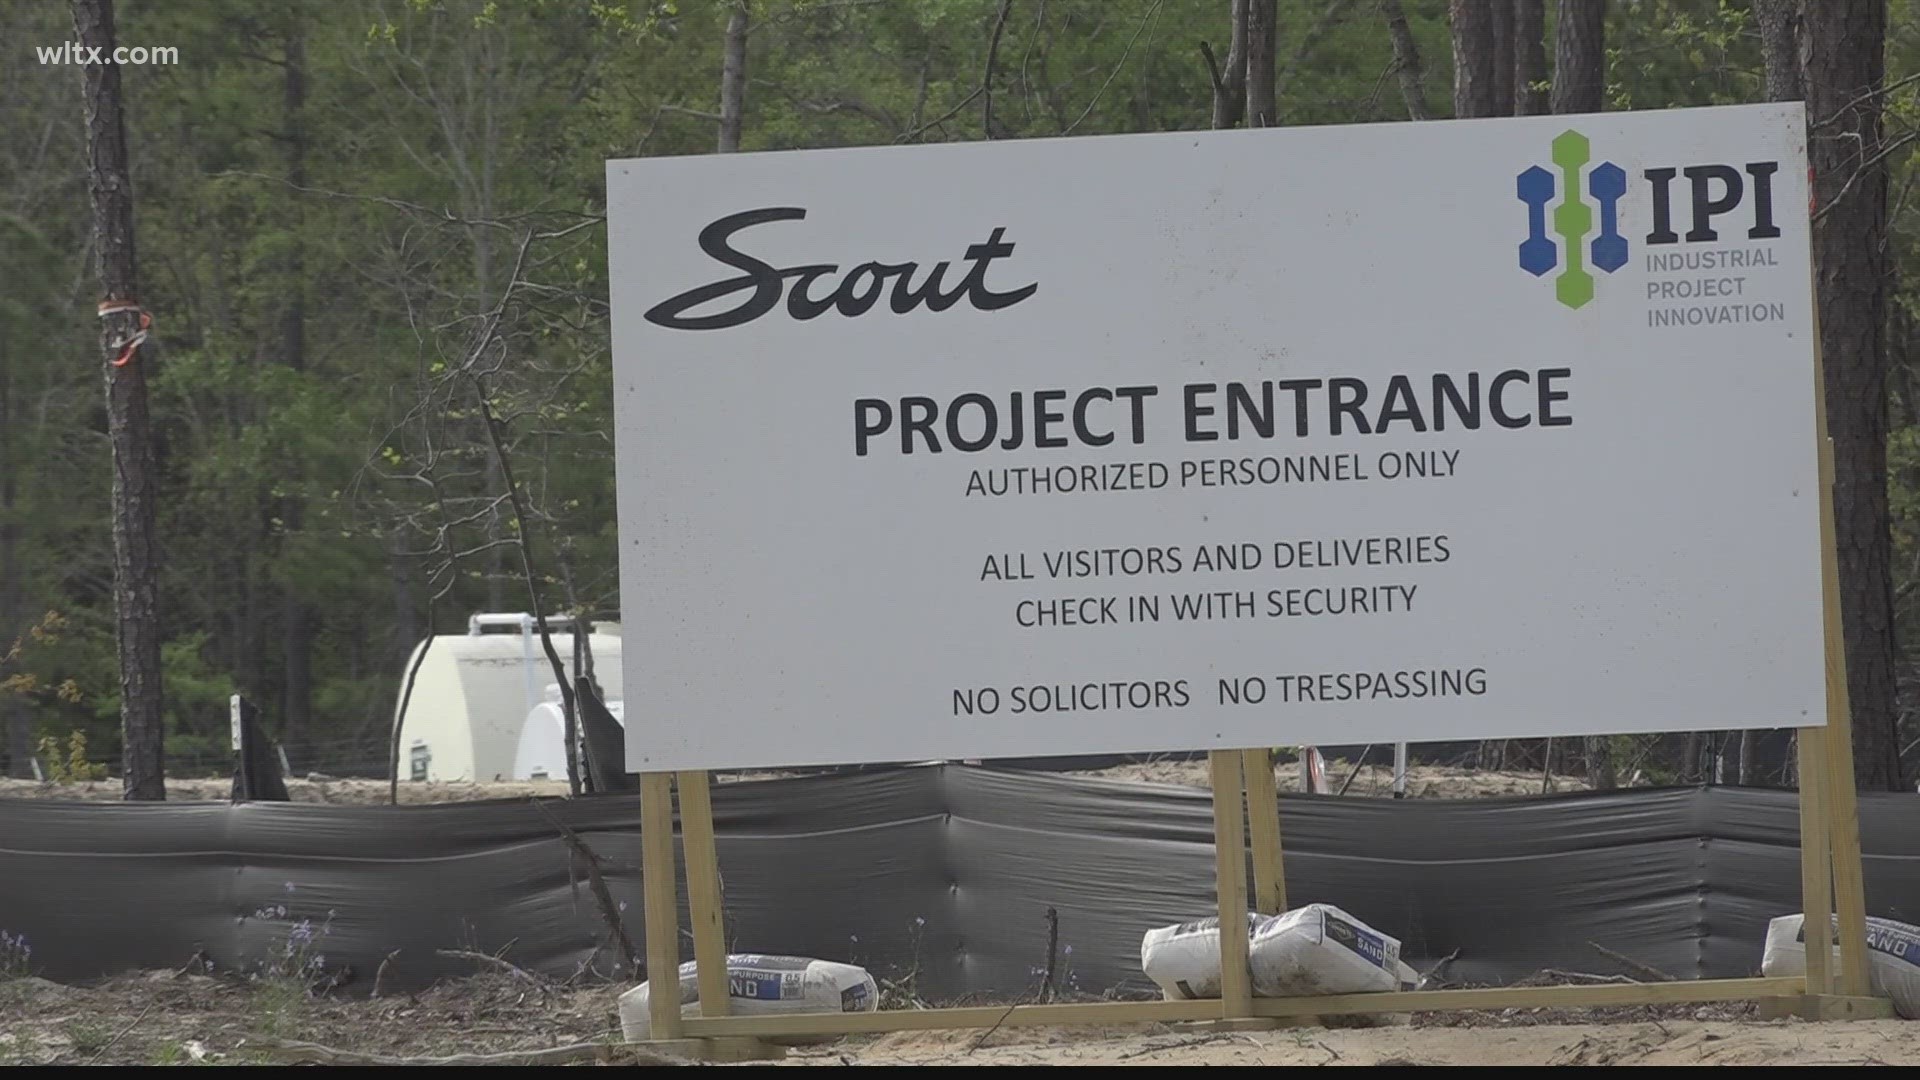 Months after construction began, Scout says construction is moving along schedule.